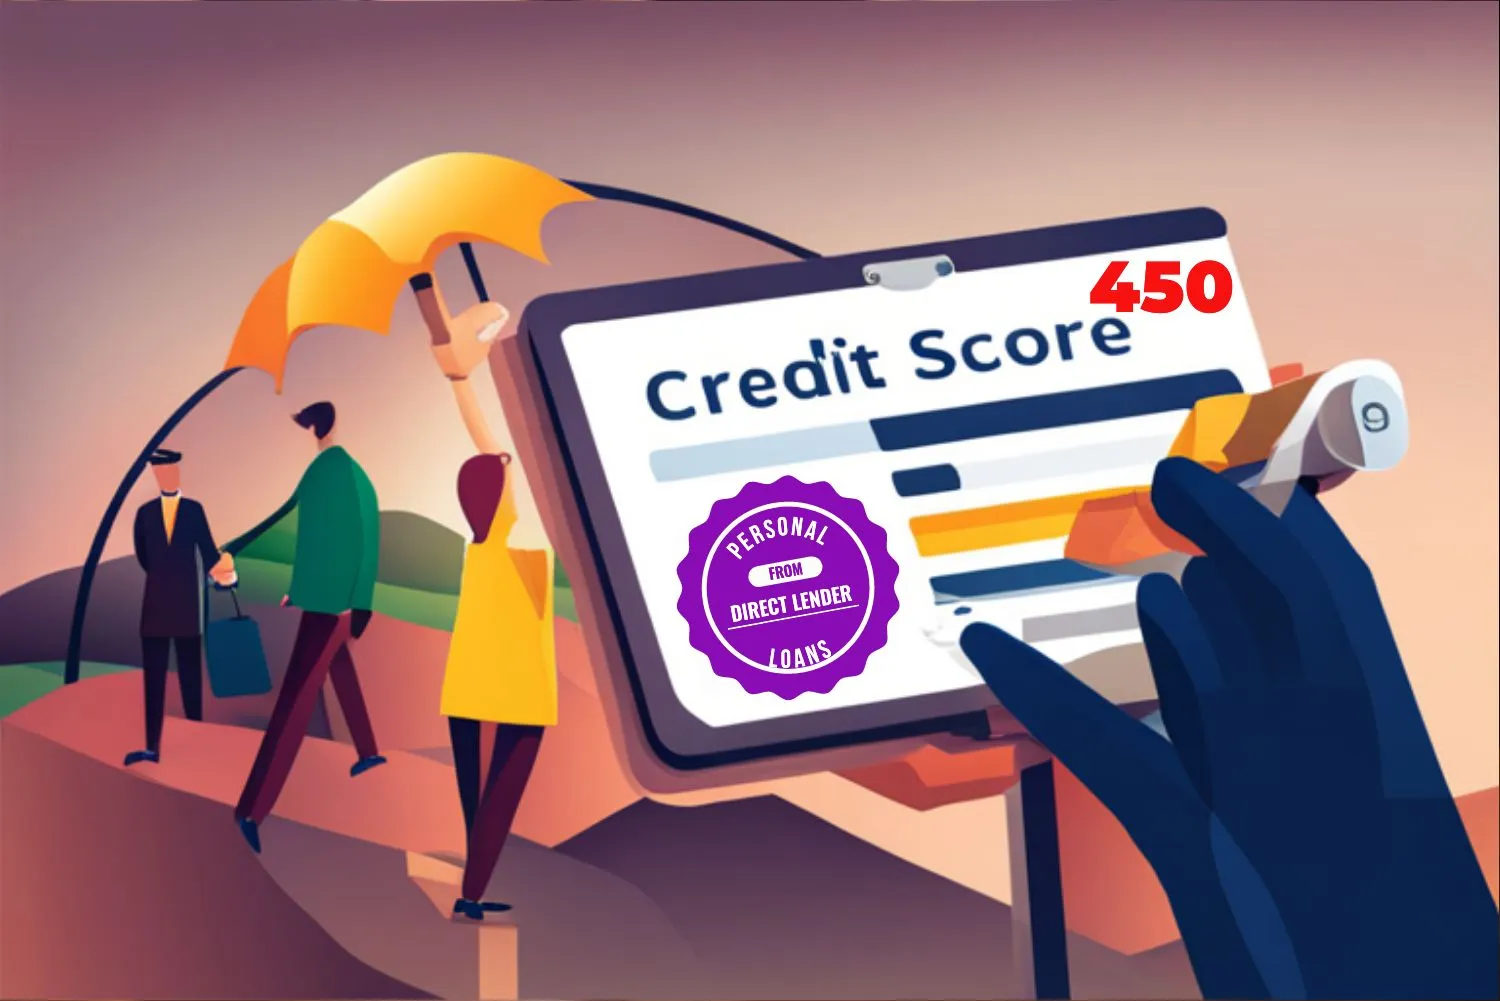 450 Credit Score Personal Loan from Direct Lender